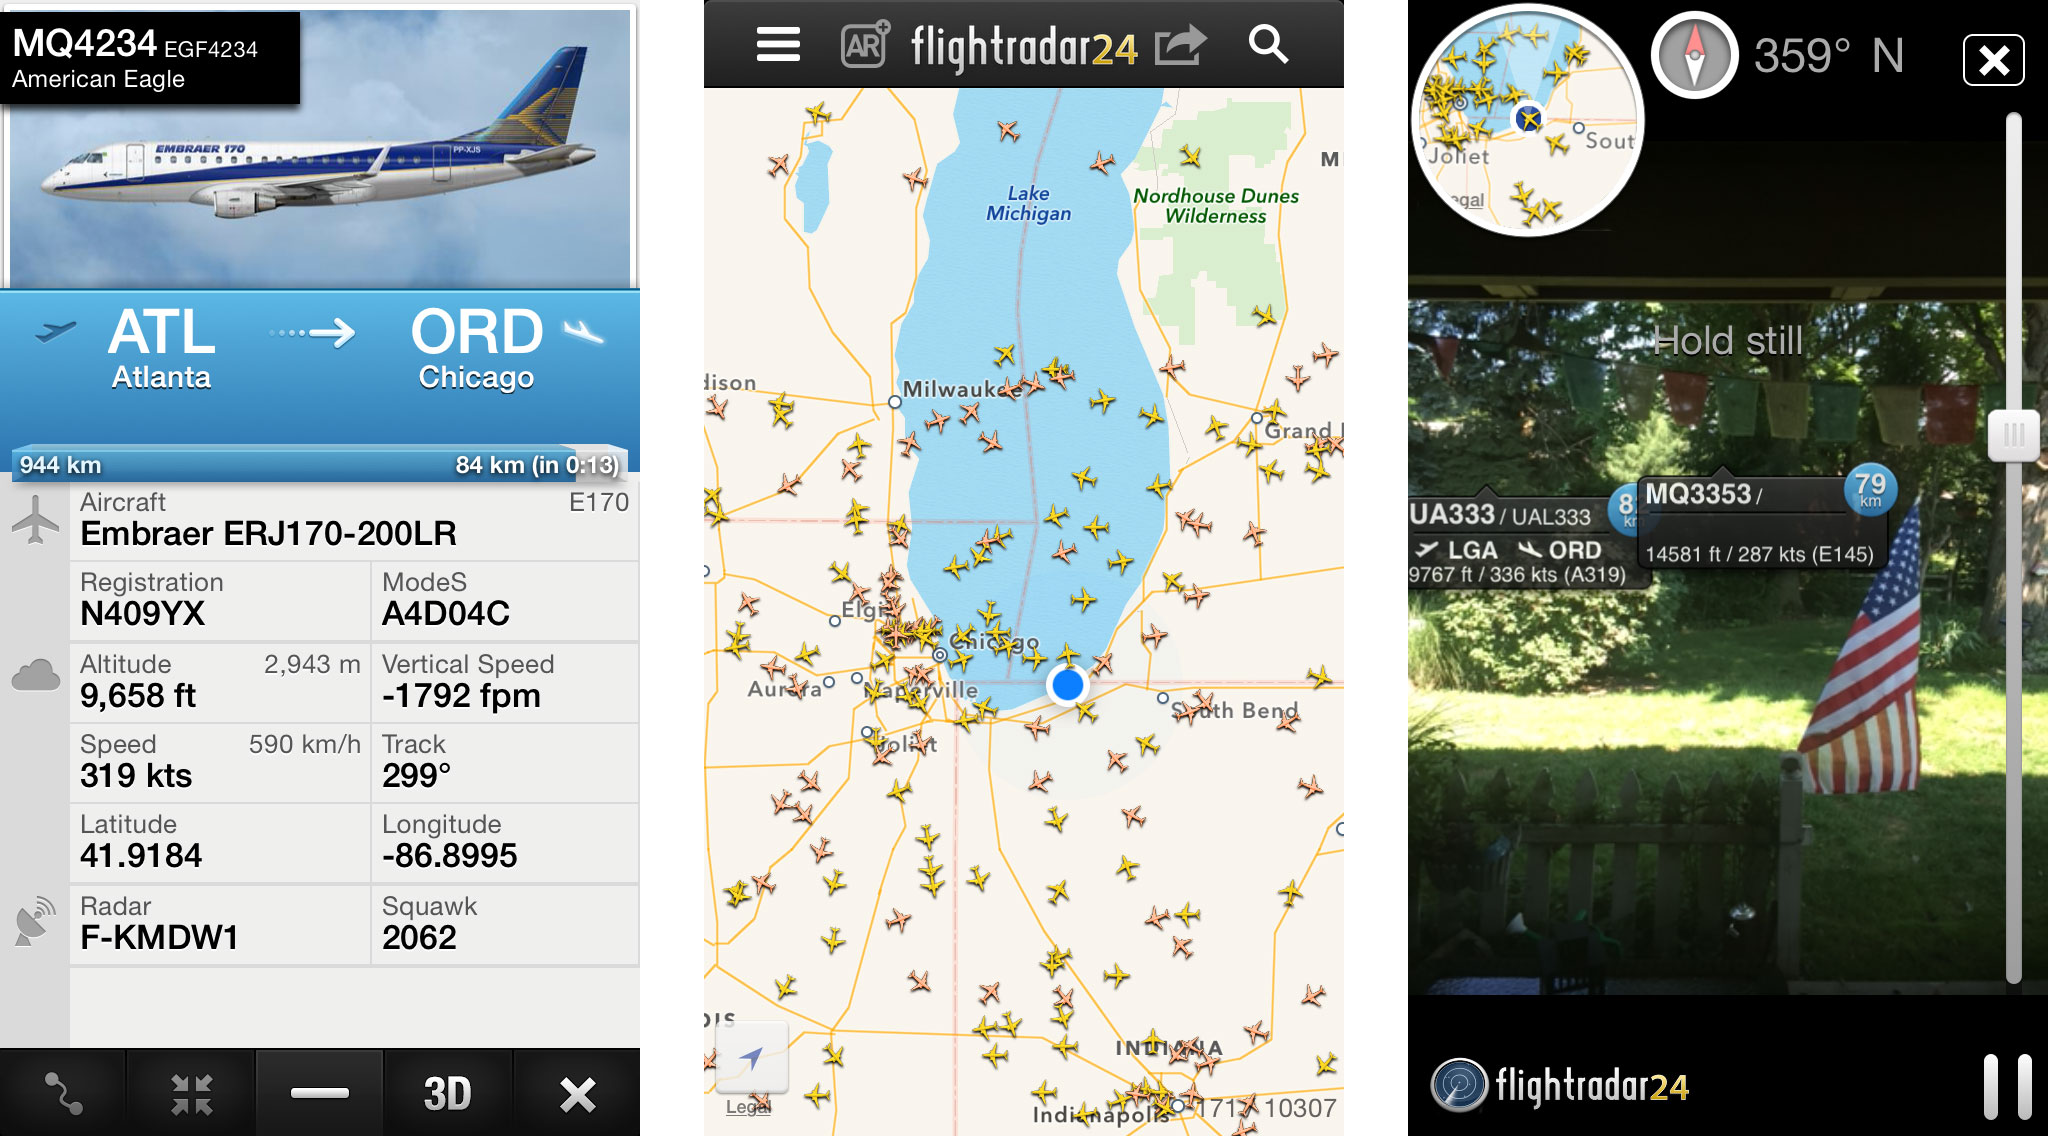 Best airport companion apps for iPhone: Flightradar24